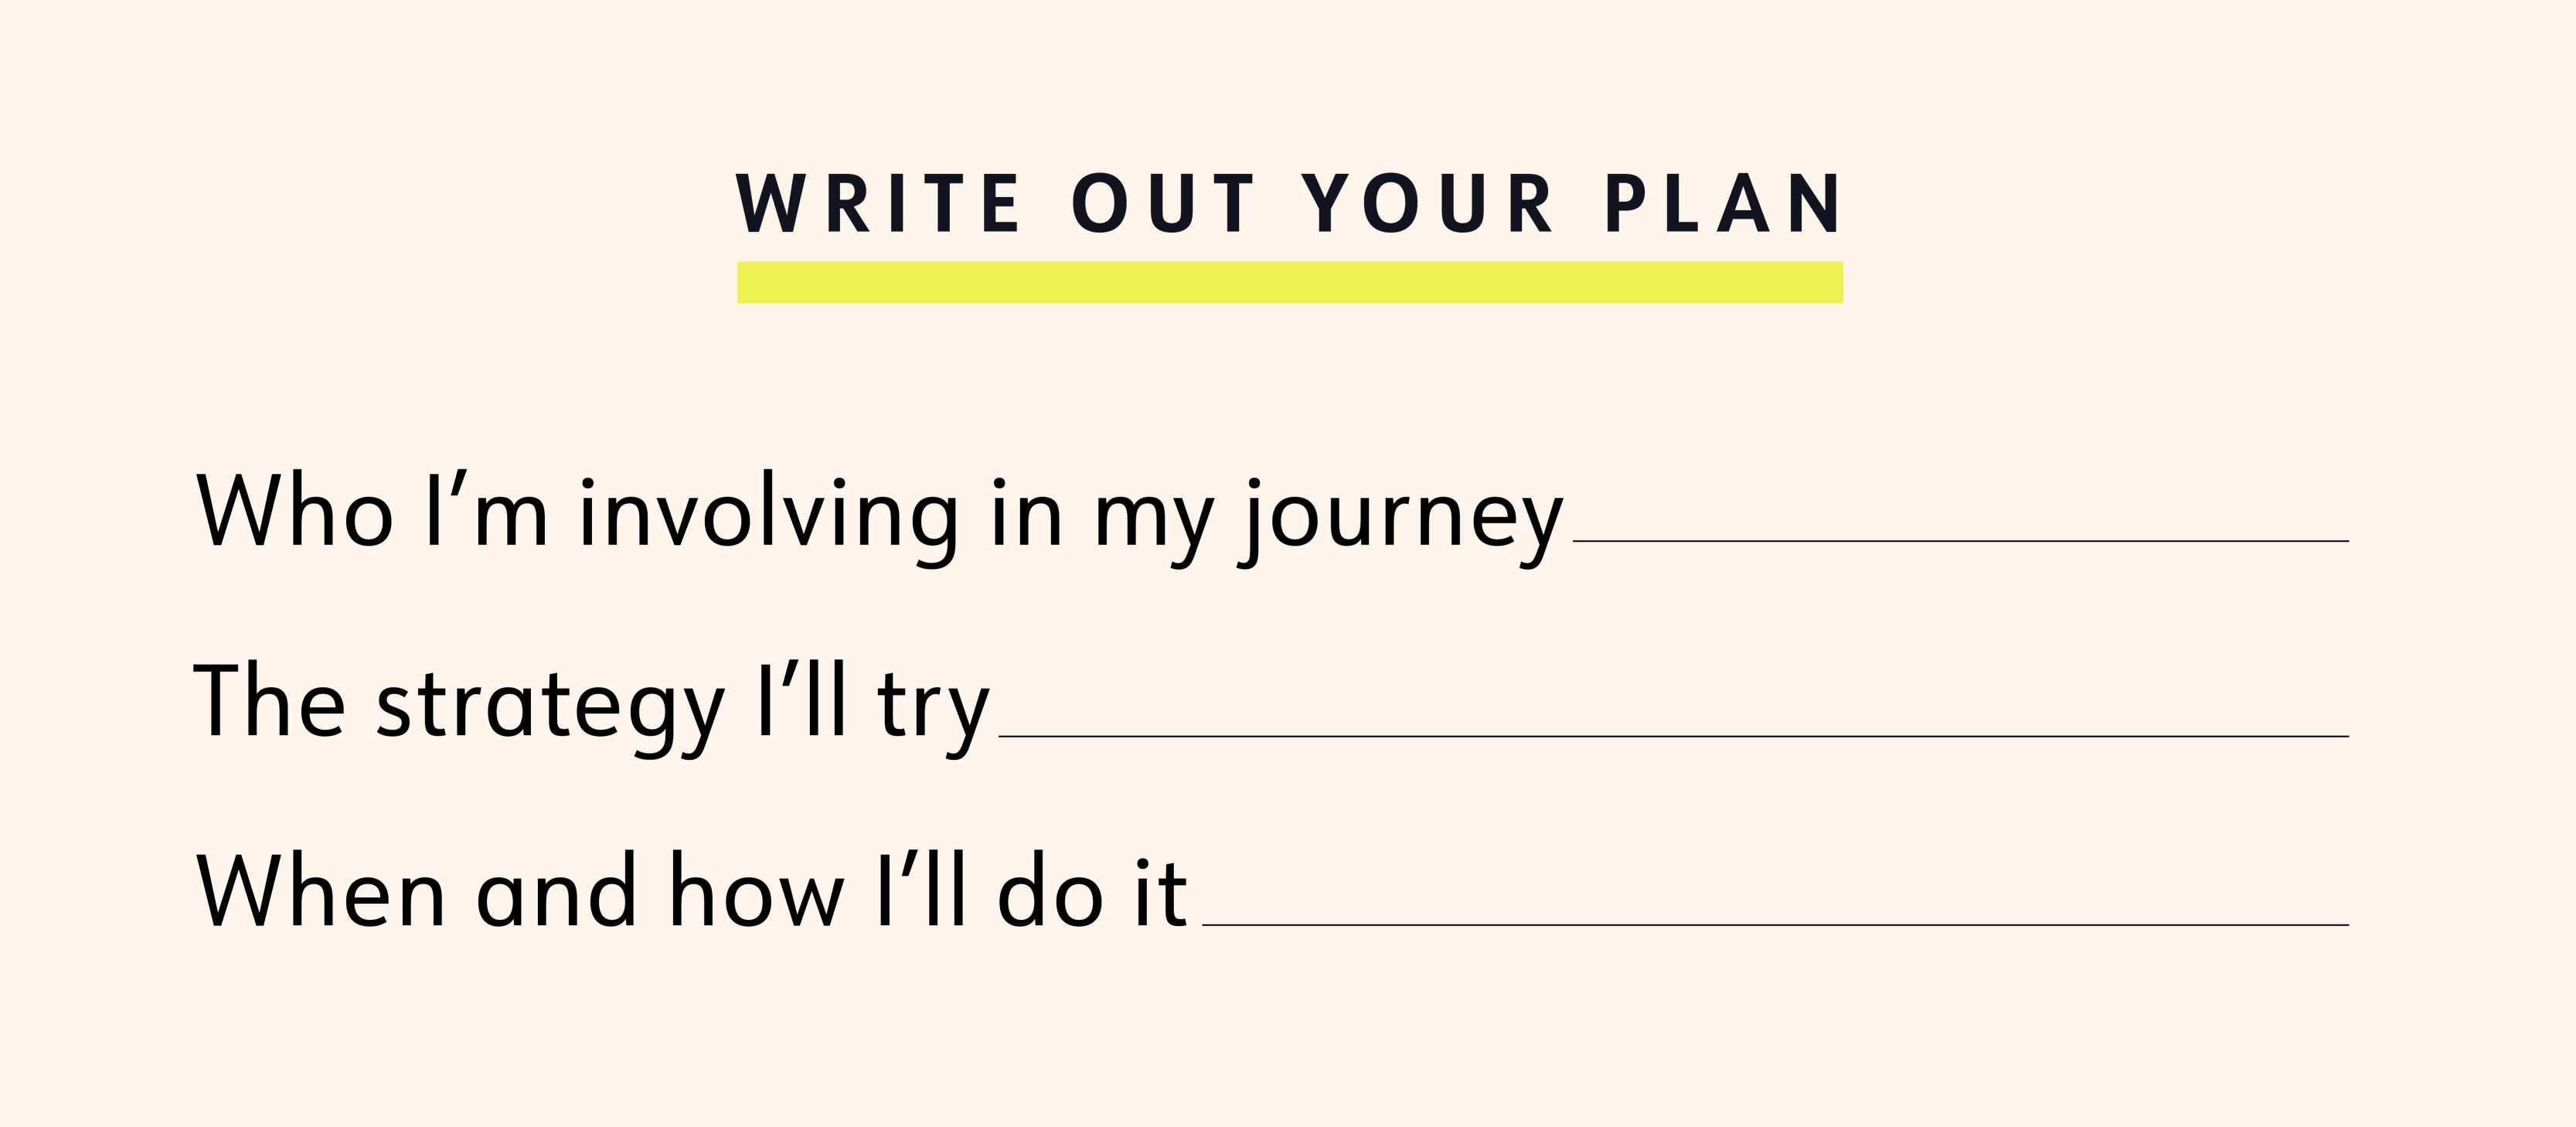 Write out your plan Who I’m involving in my journey  [fill in the blank] The strategy I’ll try [fill in the blank] When and how I’ll do it [fill in the blank]